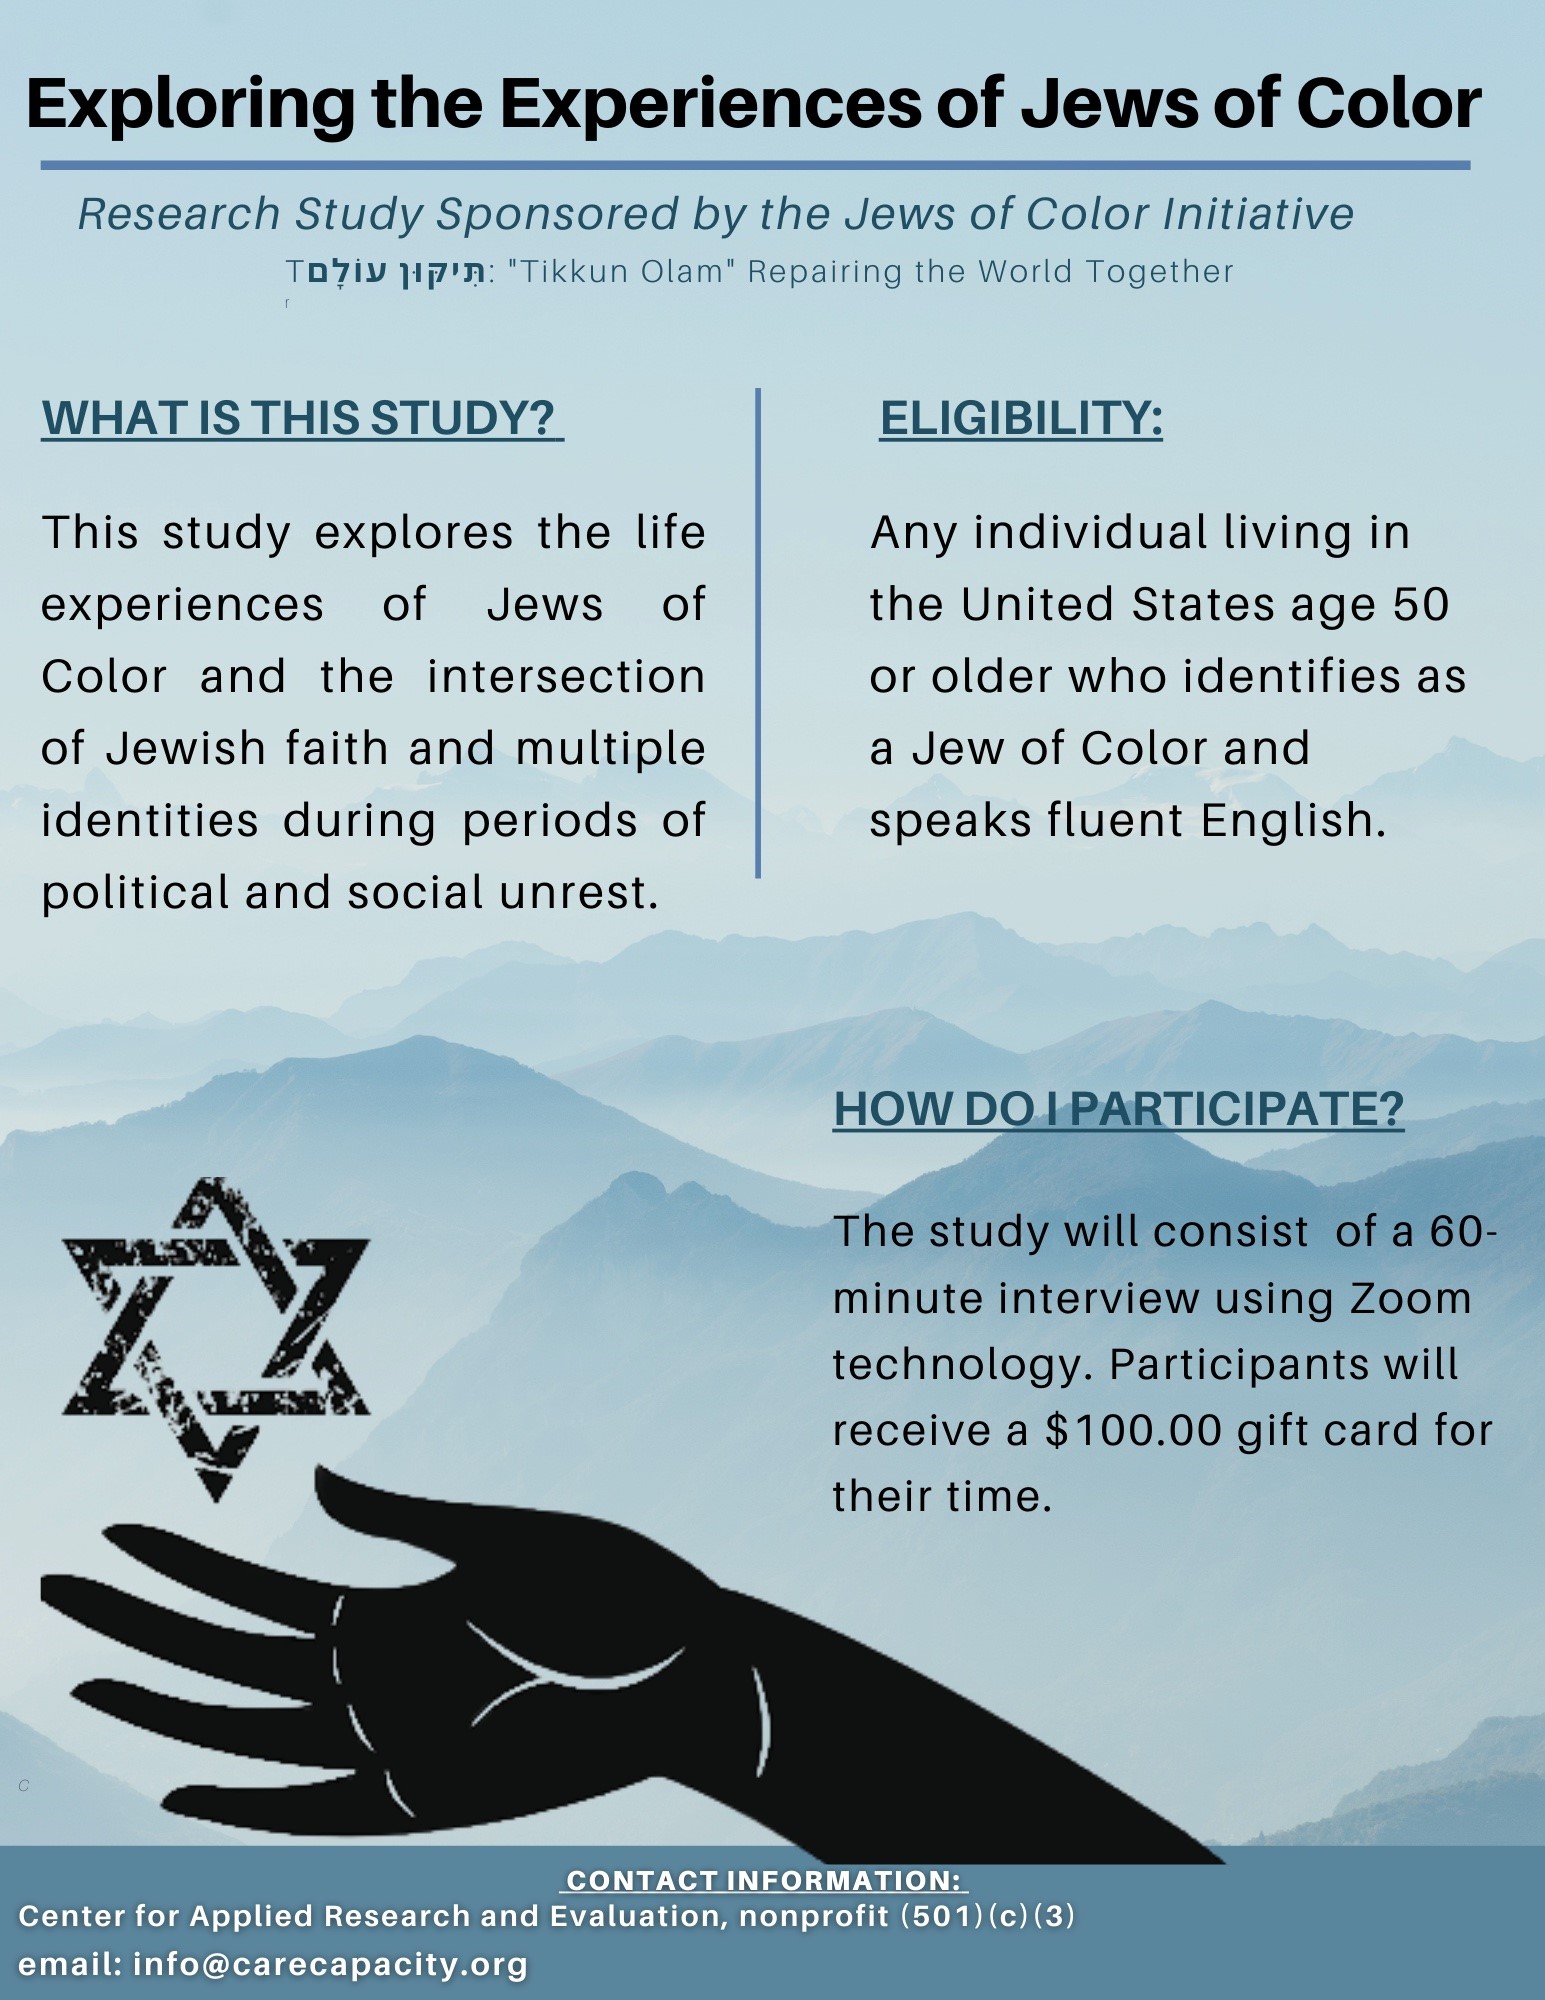 Exploring the Experiences of Jews of Color (research flyer; seeking participants 50+, full text below)